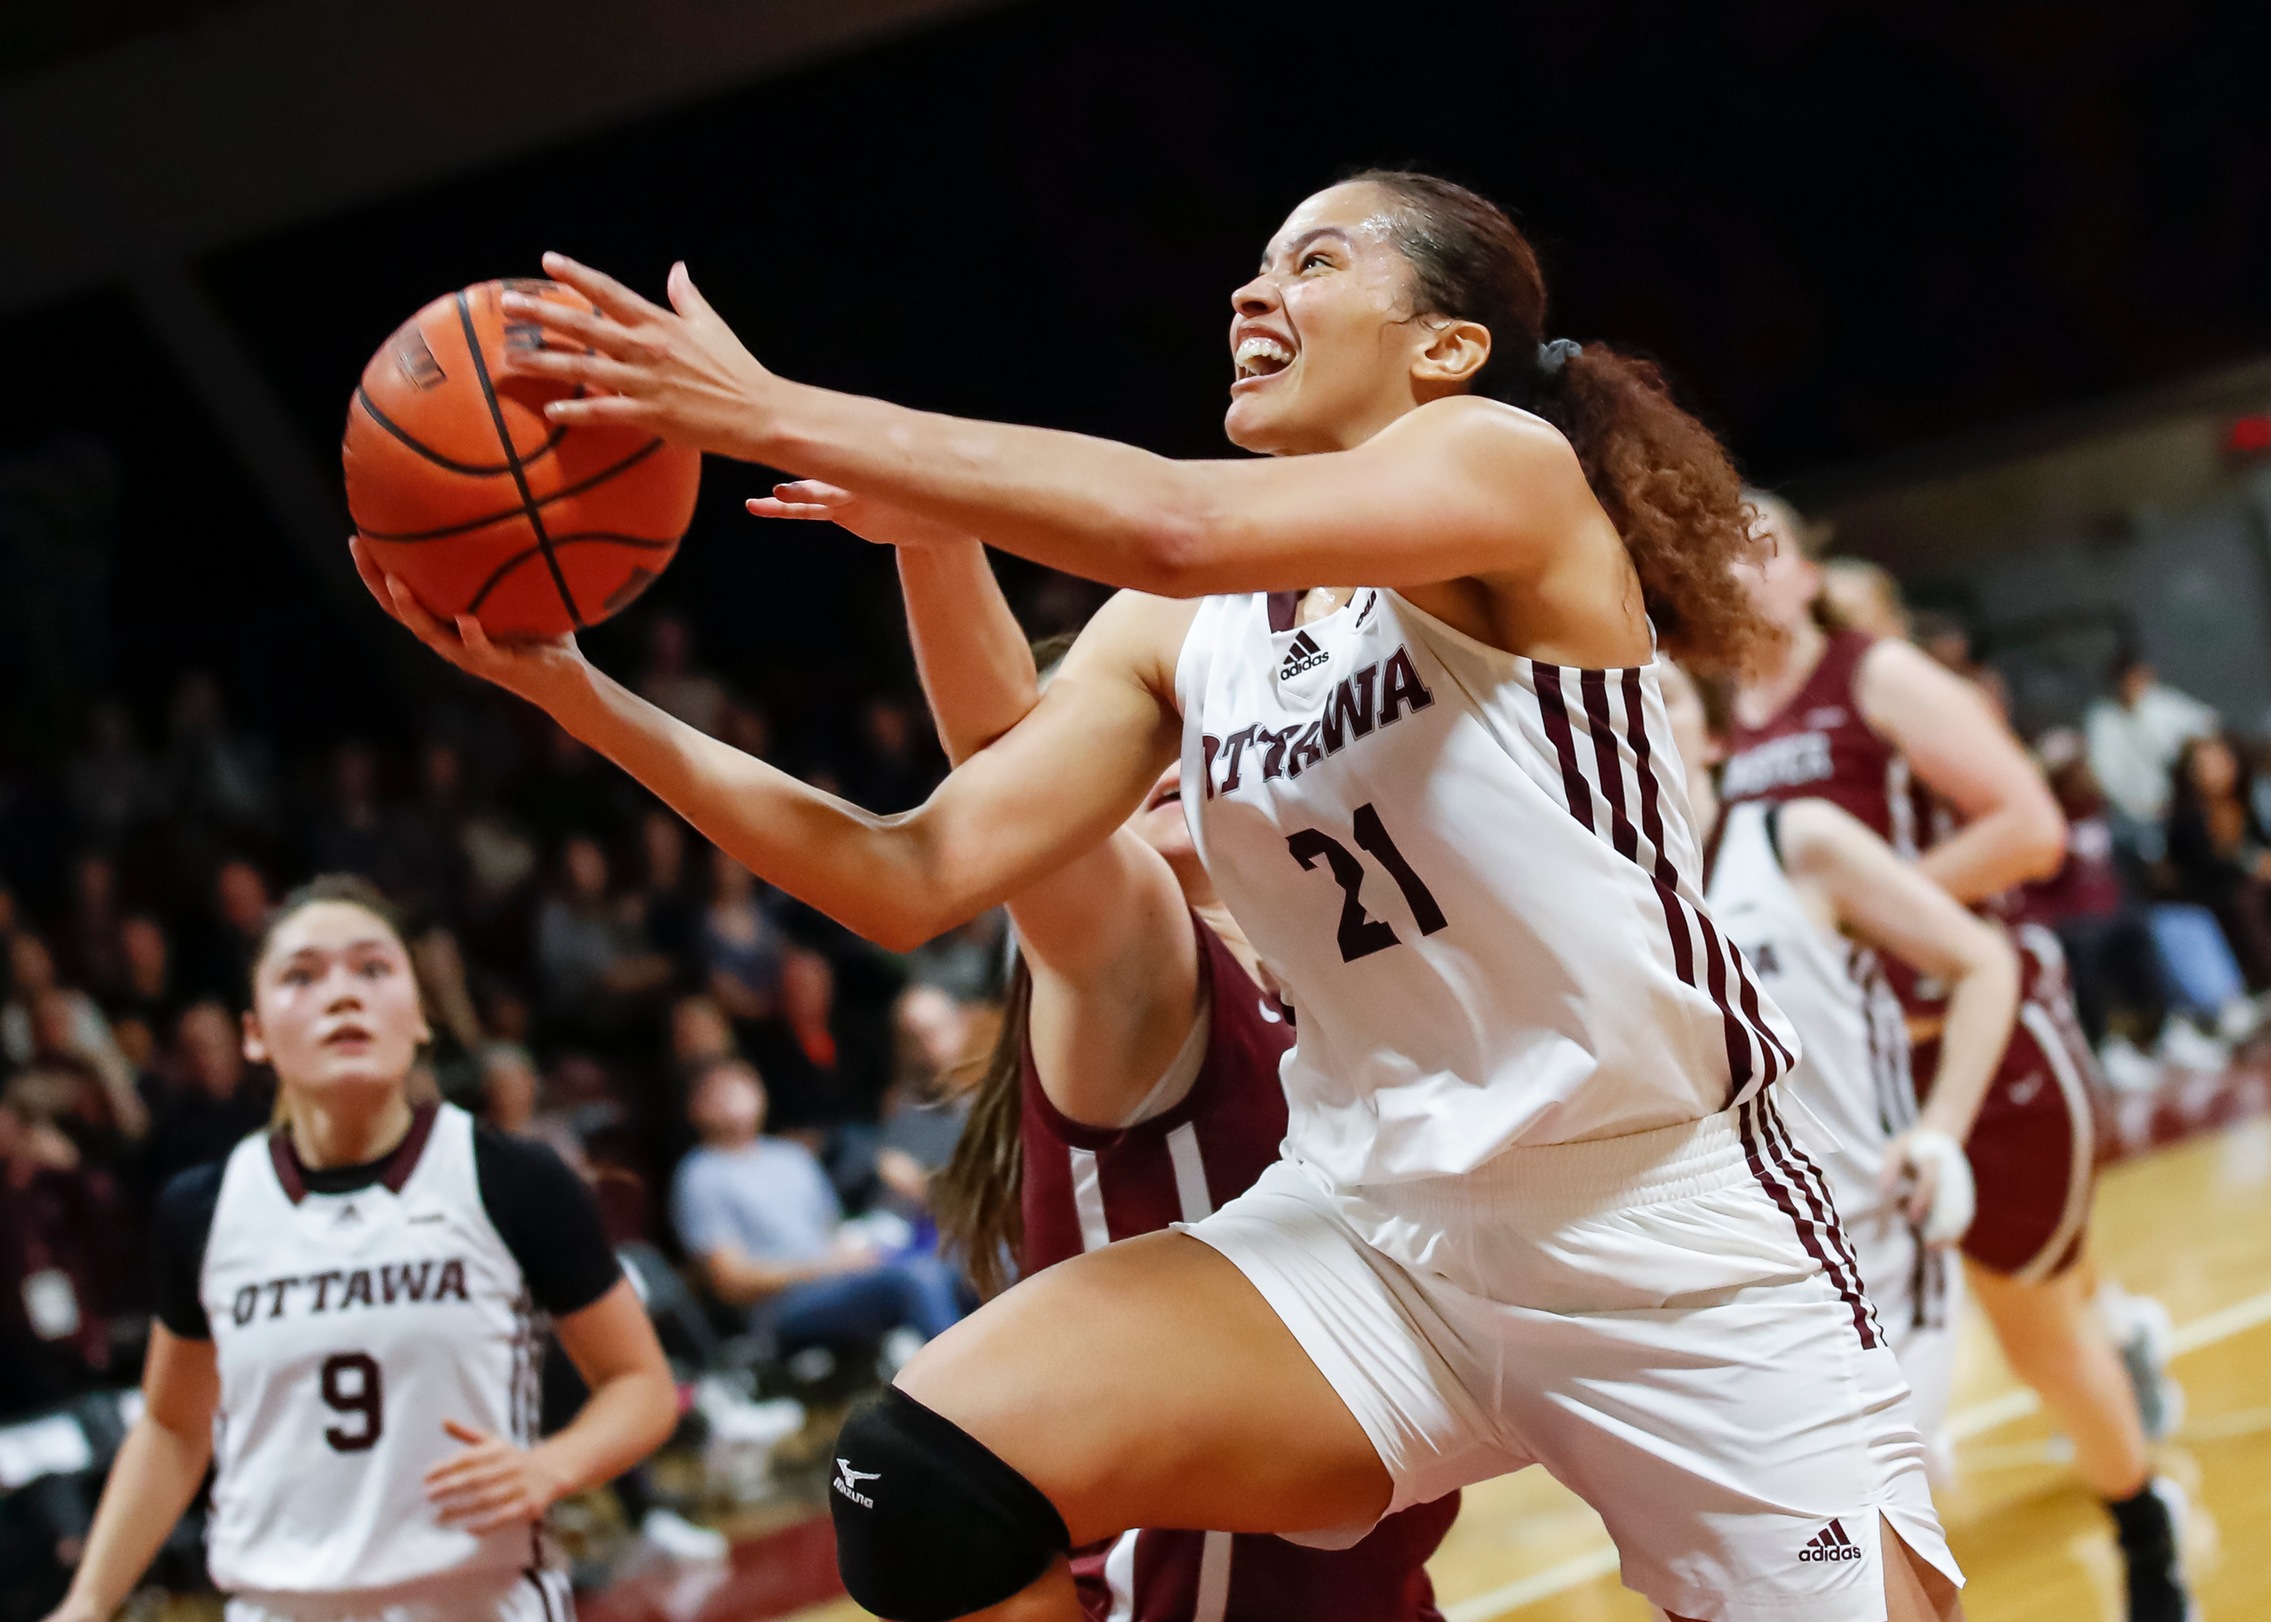 WEEKEND RECAP: Gee-Gees women&rsquo;s basketball downs Mac and York to open season